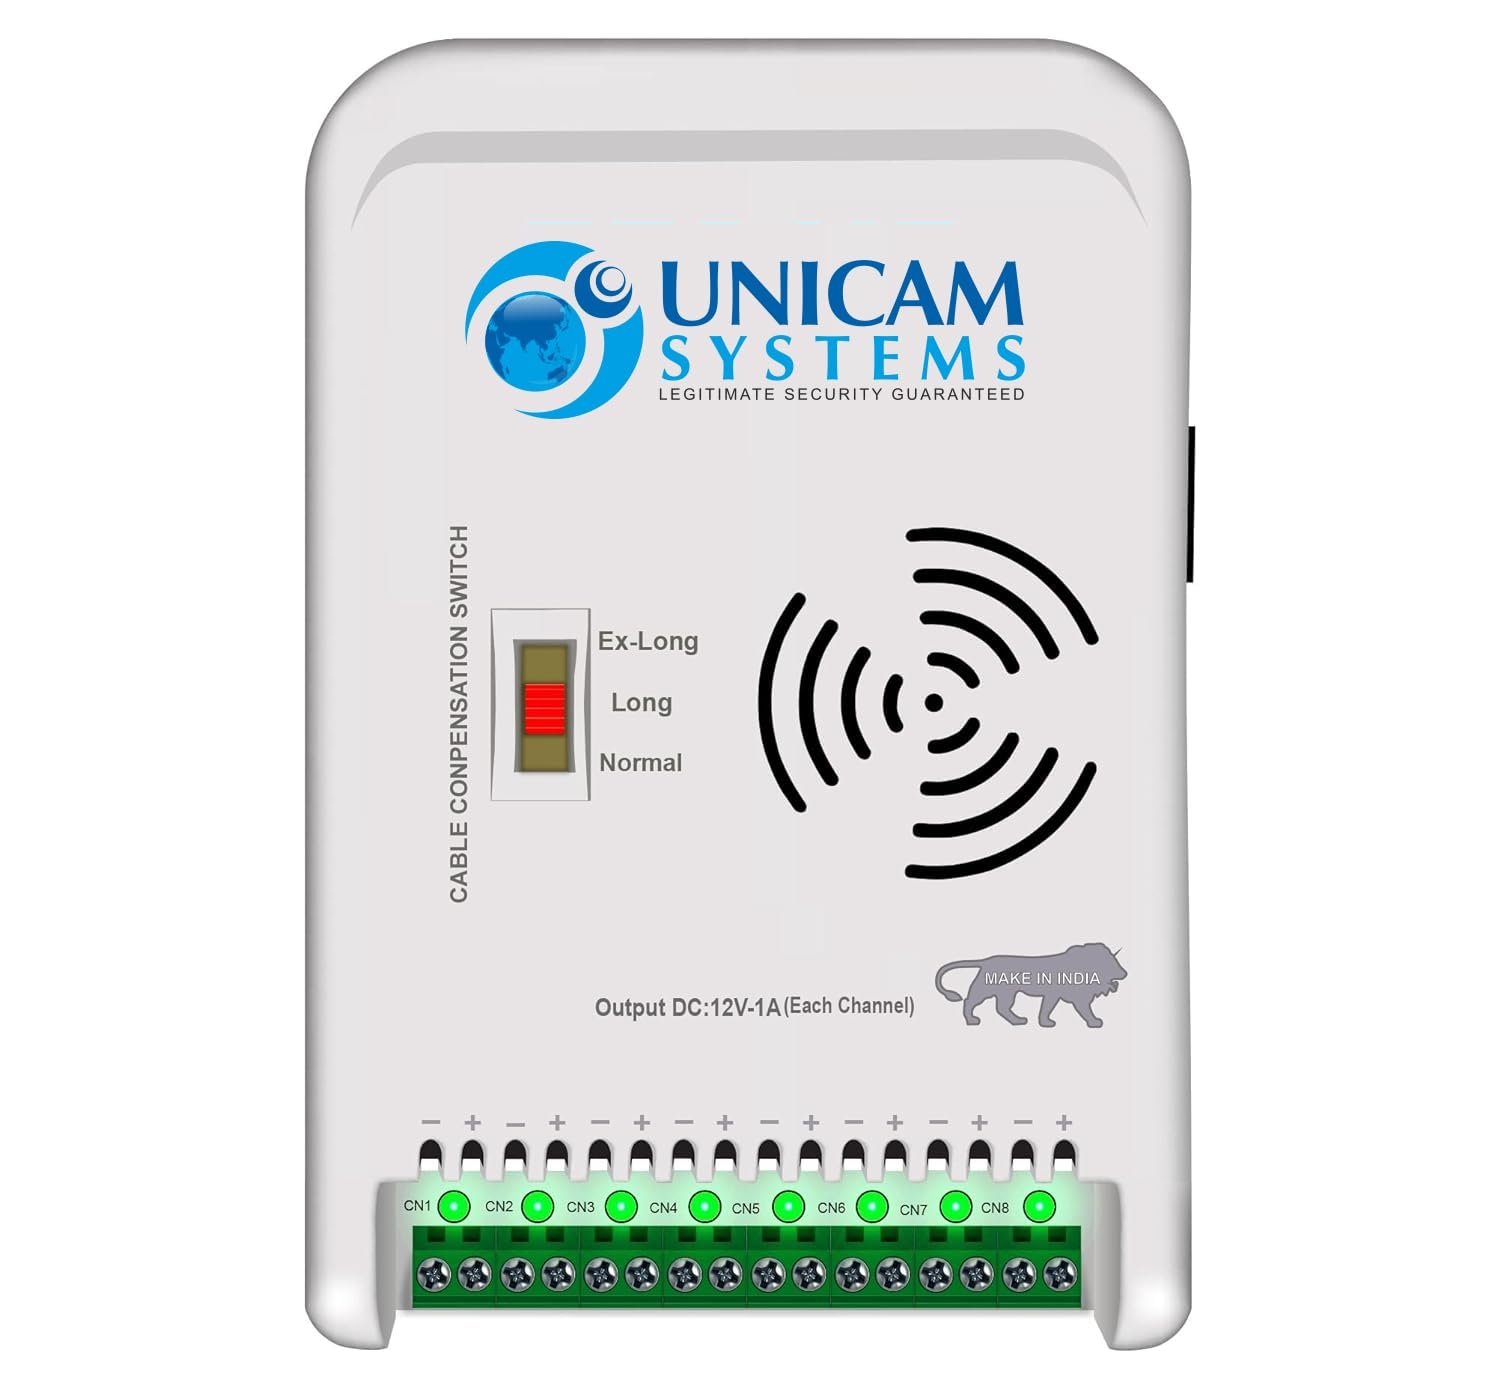 Unicam 8 Channel SMPS for CCTV, Power Supply | 8 Cameras for CP Plus, Hikvision, Dahua, | 2 Years Replacement Warranty